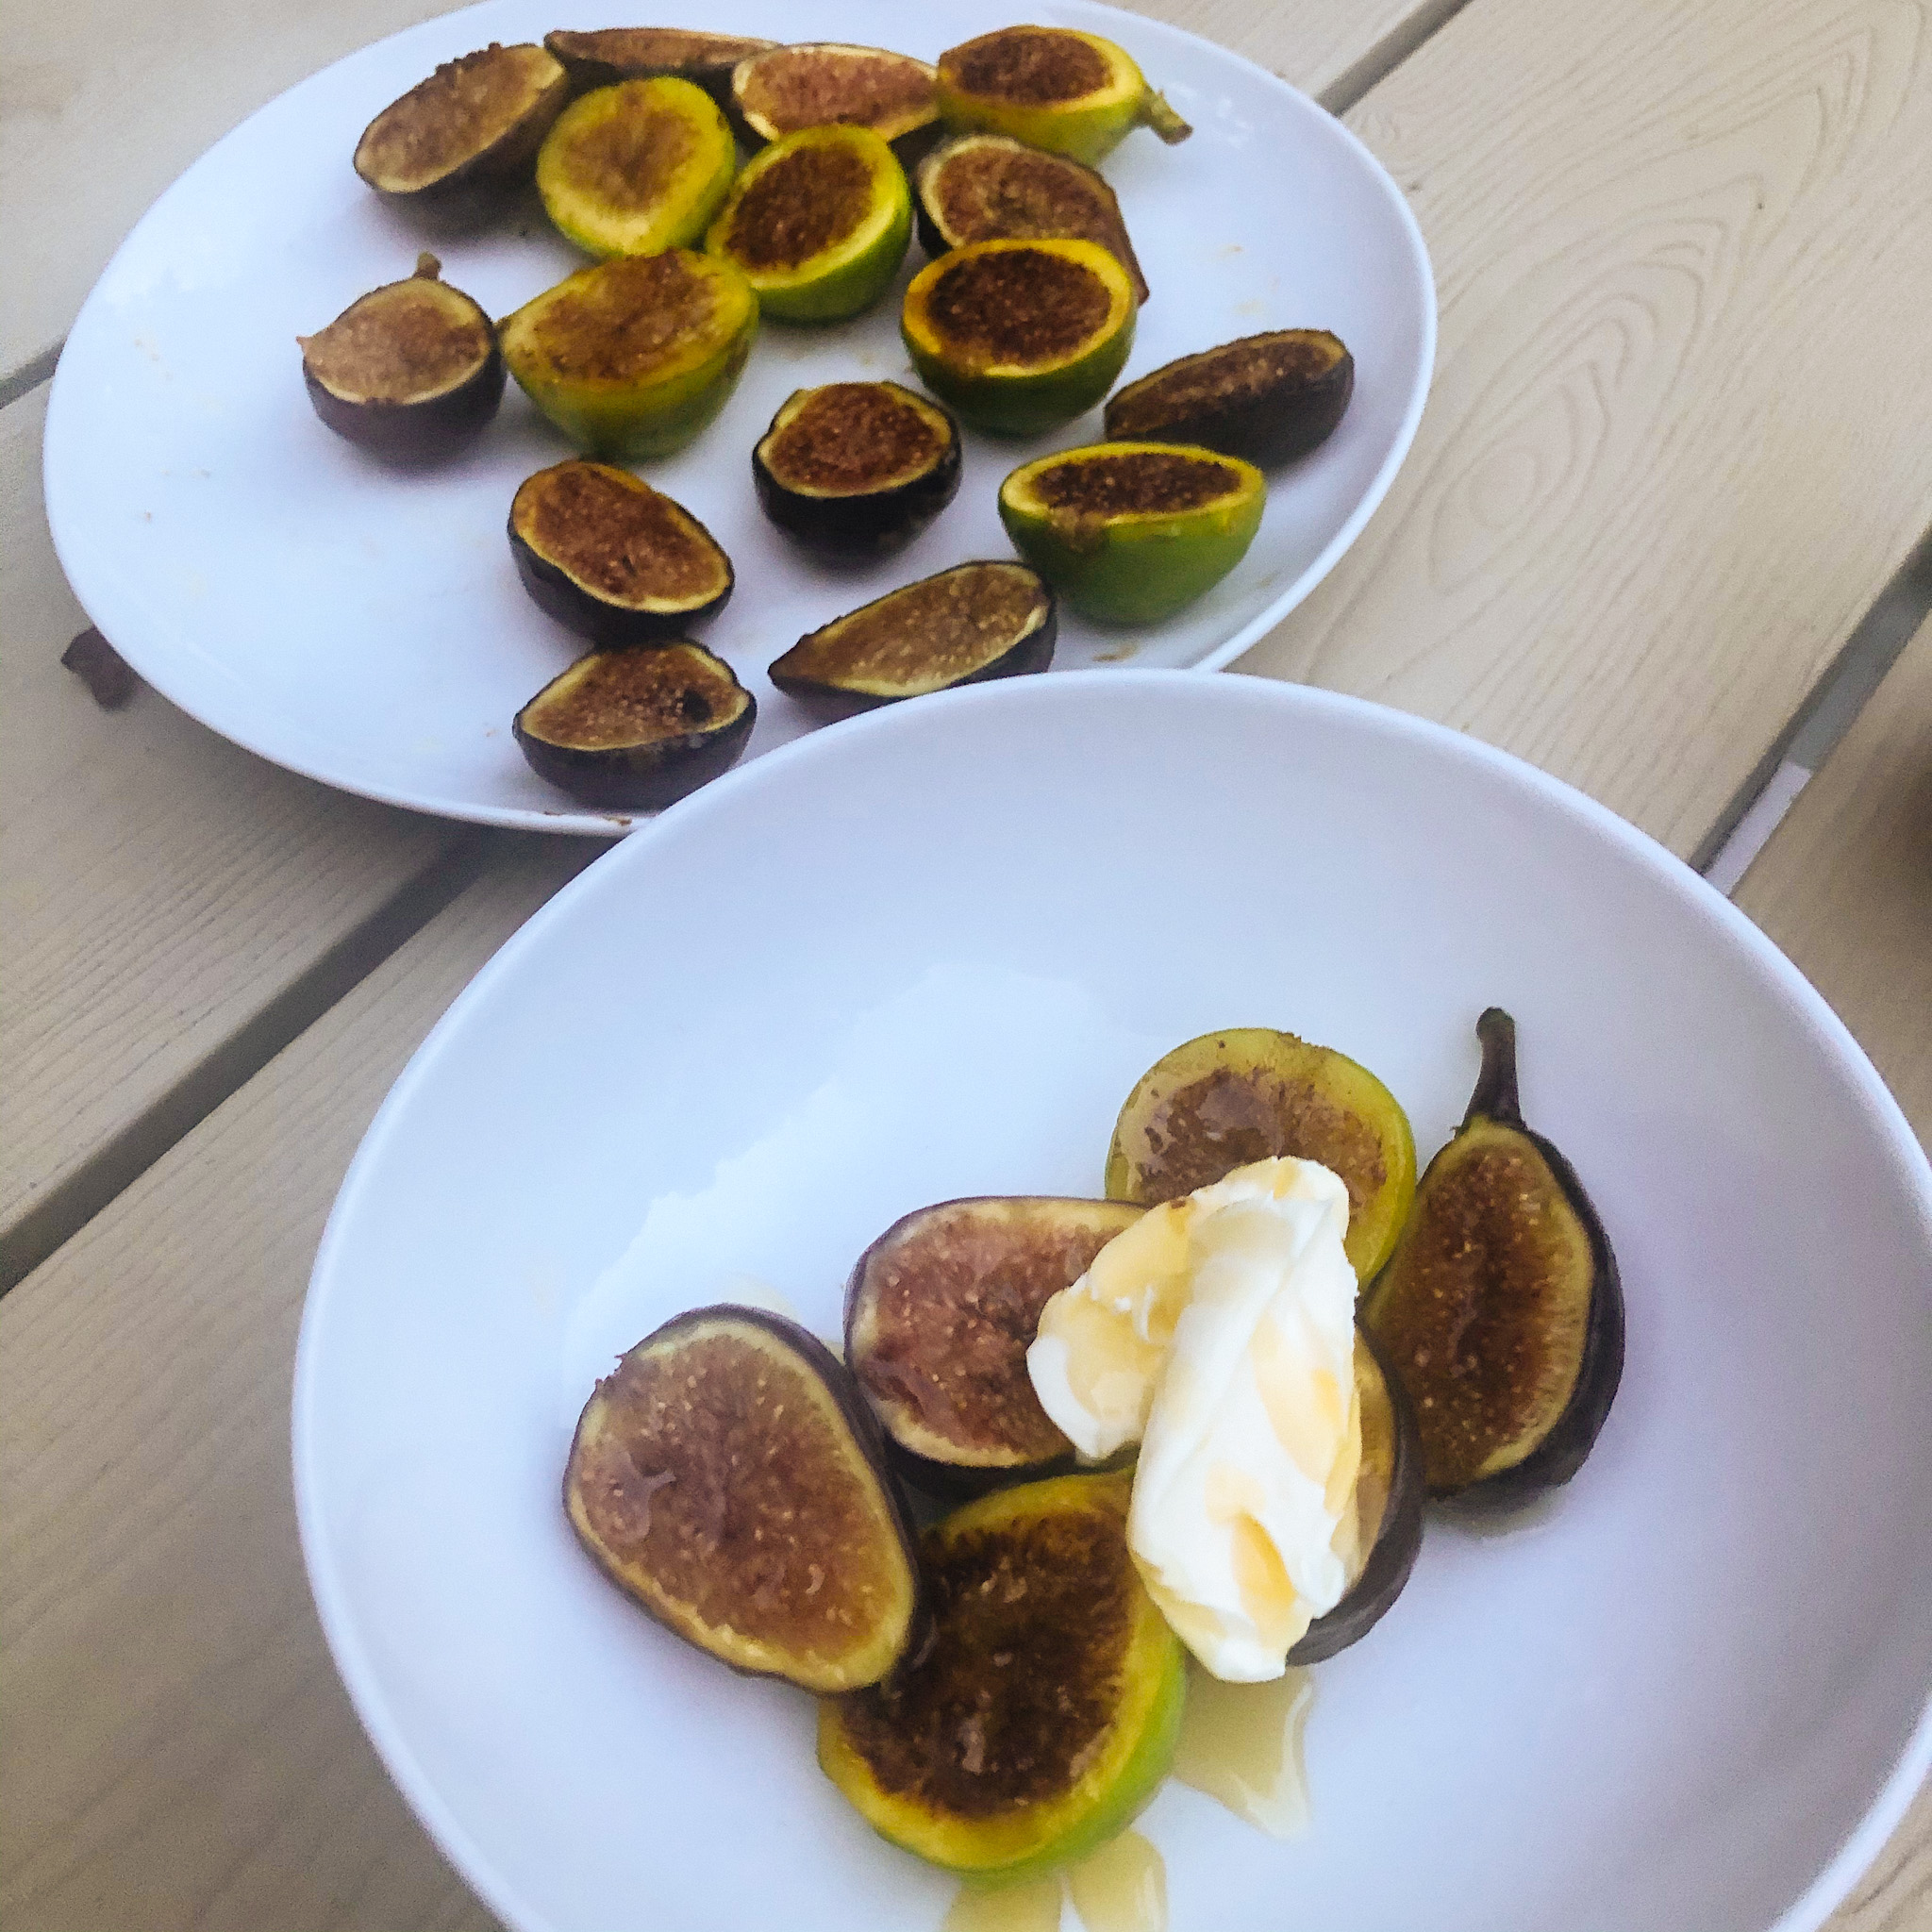 finished plate of figs with mascarpone and honey